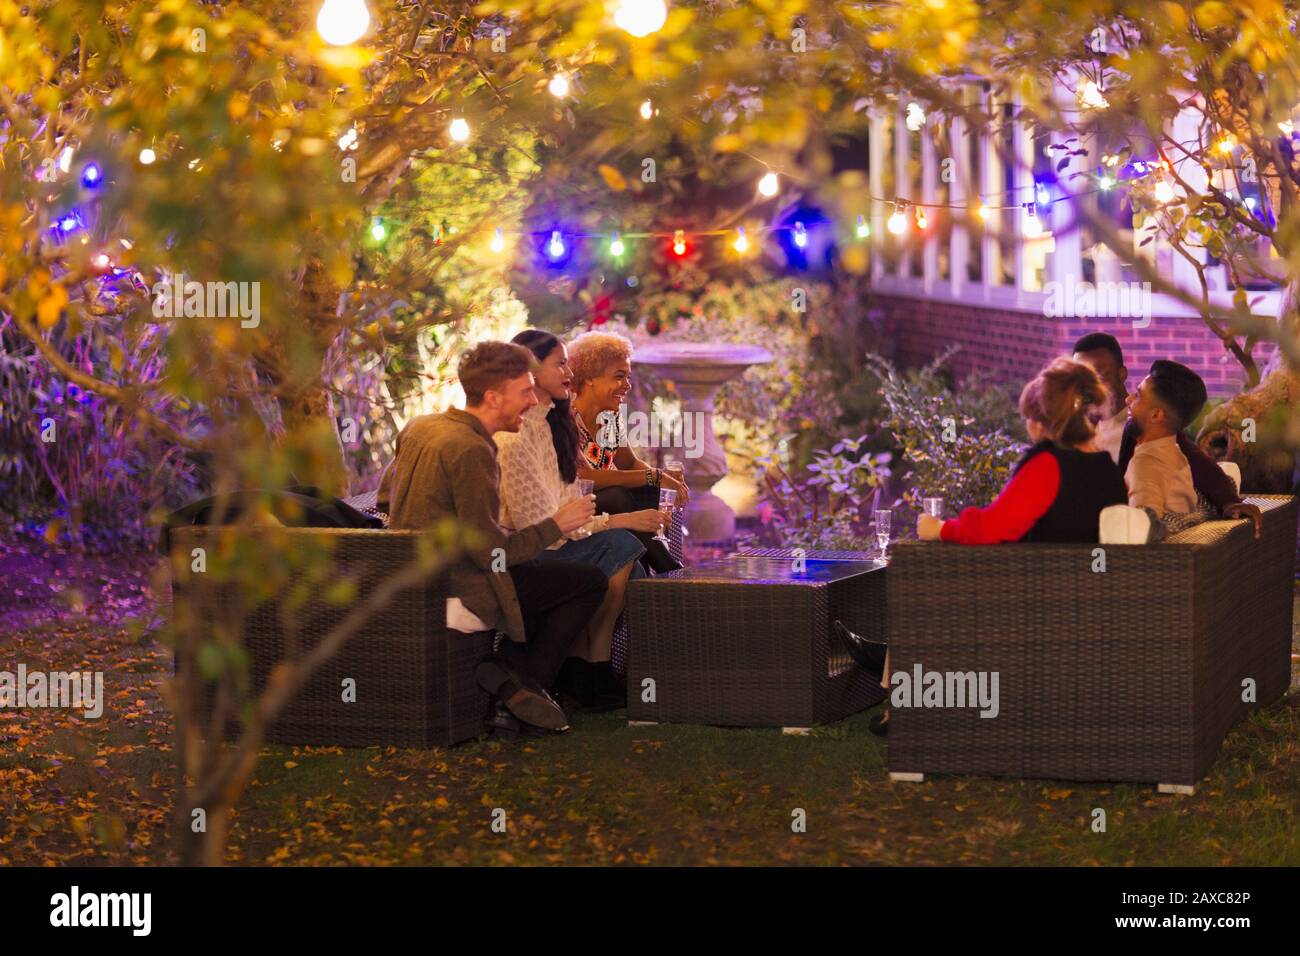 Friends talking and drinking under trees with string lights at garden party Stock Photo